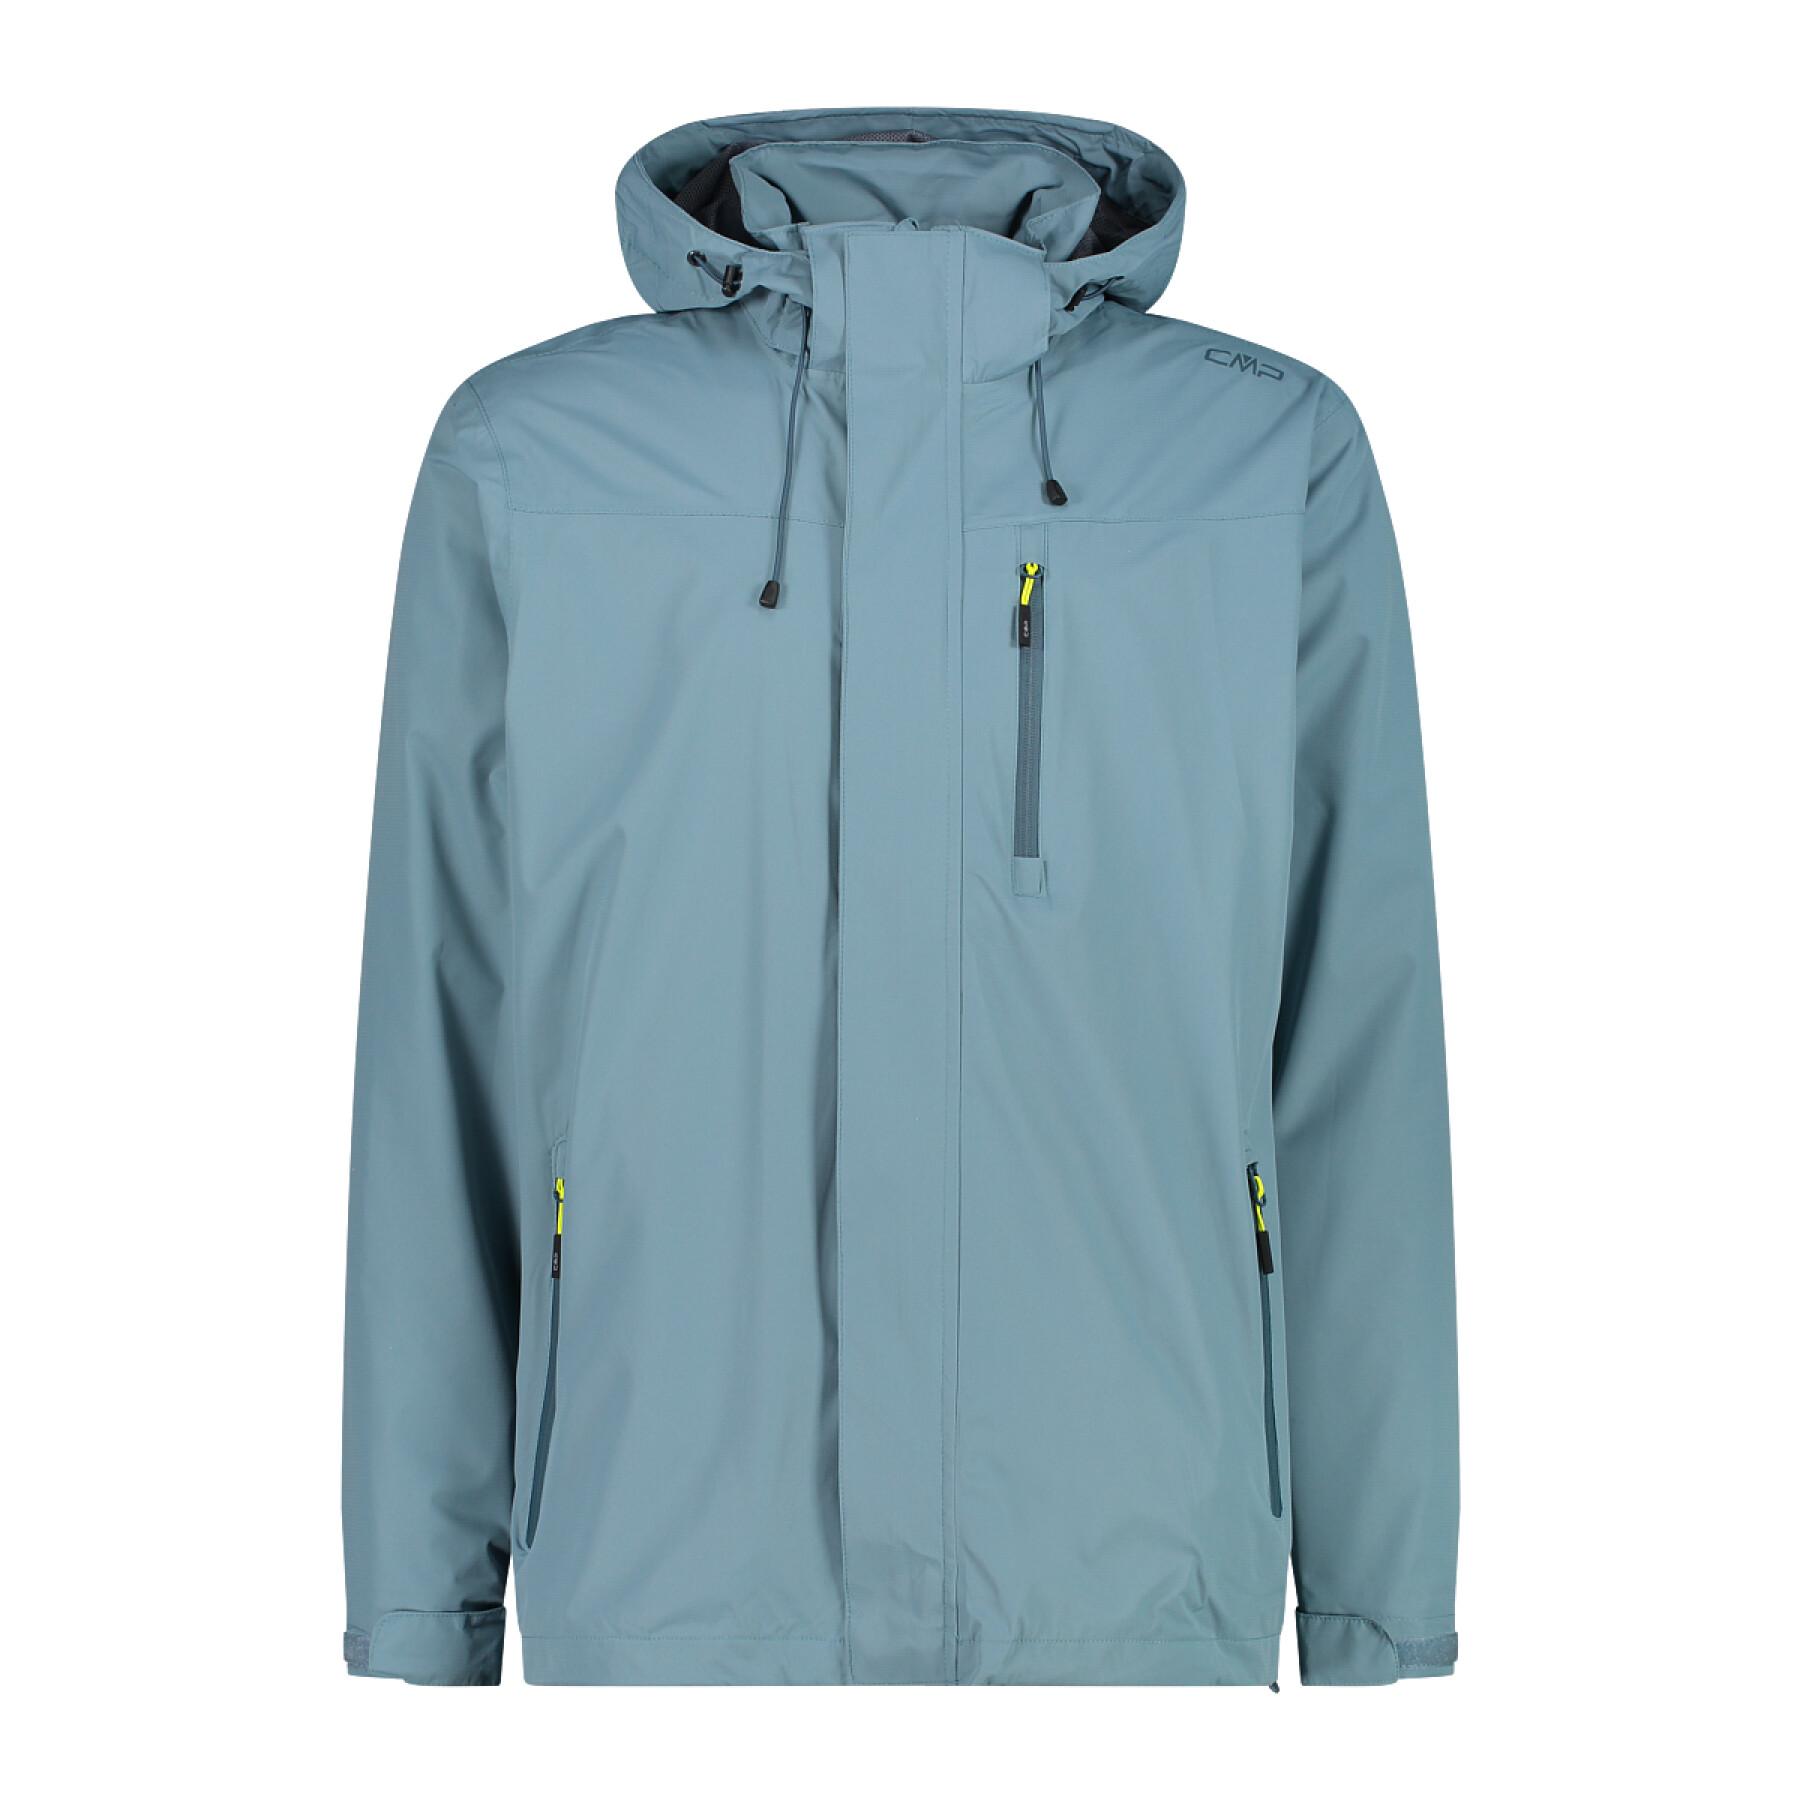 Zip-up hooded jacket with ventilation CMP